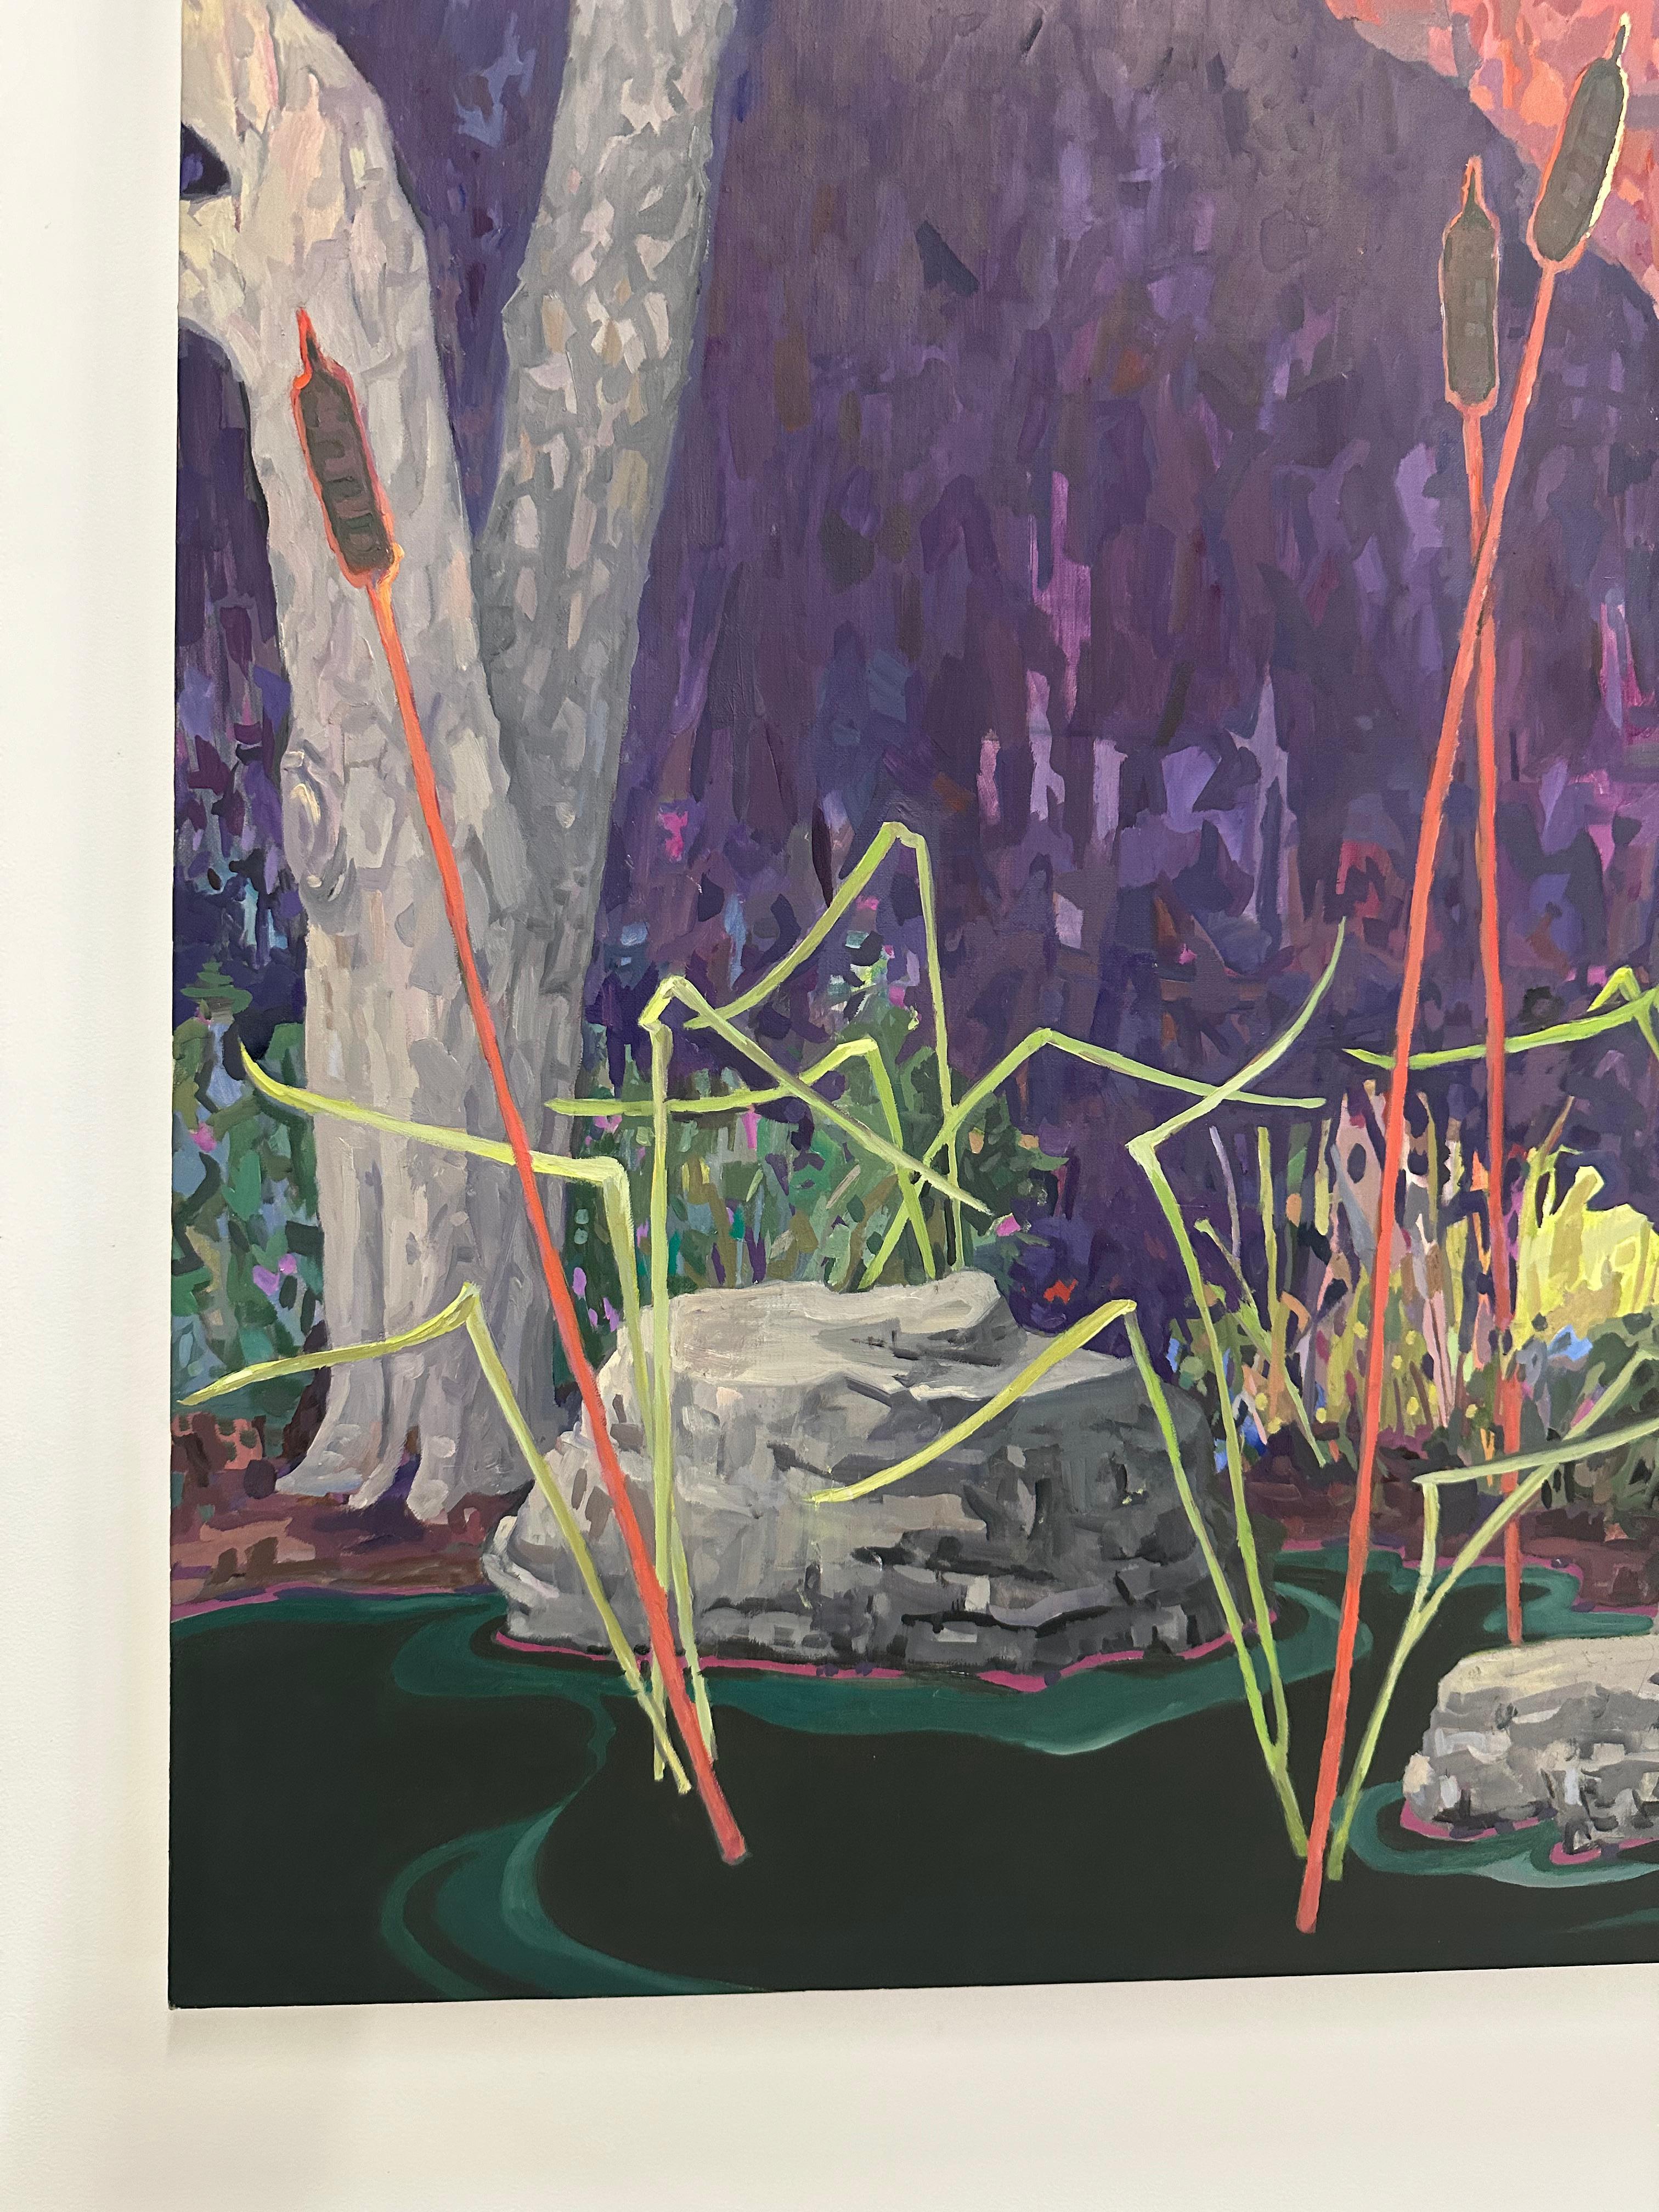 Cattails spring from the dark green water in front of thick shrubbery and trees along the edge of the bank in this peaceful marsh landscape in rich tones of violet purple and dusty rose by KK Kozik. Signed, dated, and titled on verso.

KK Kozik is a